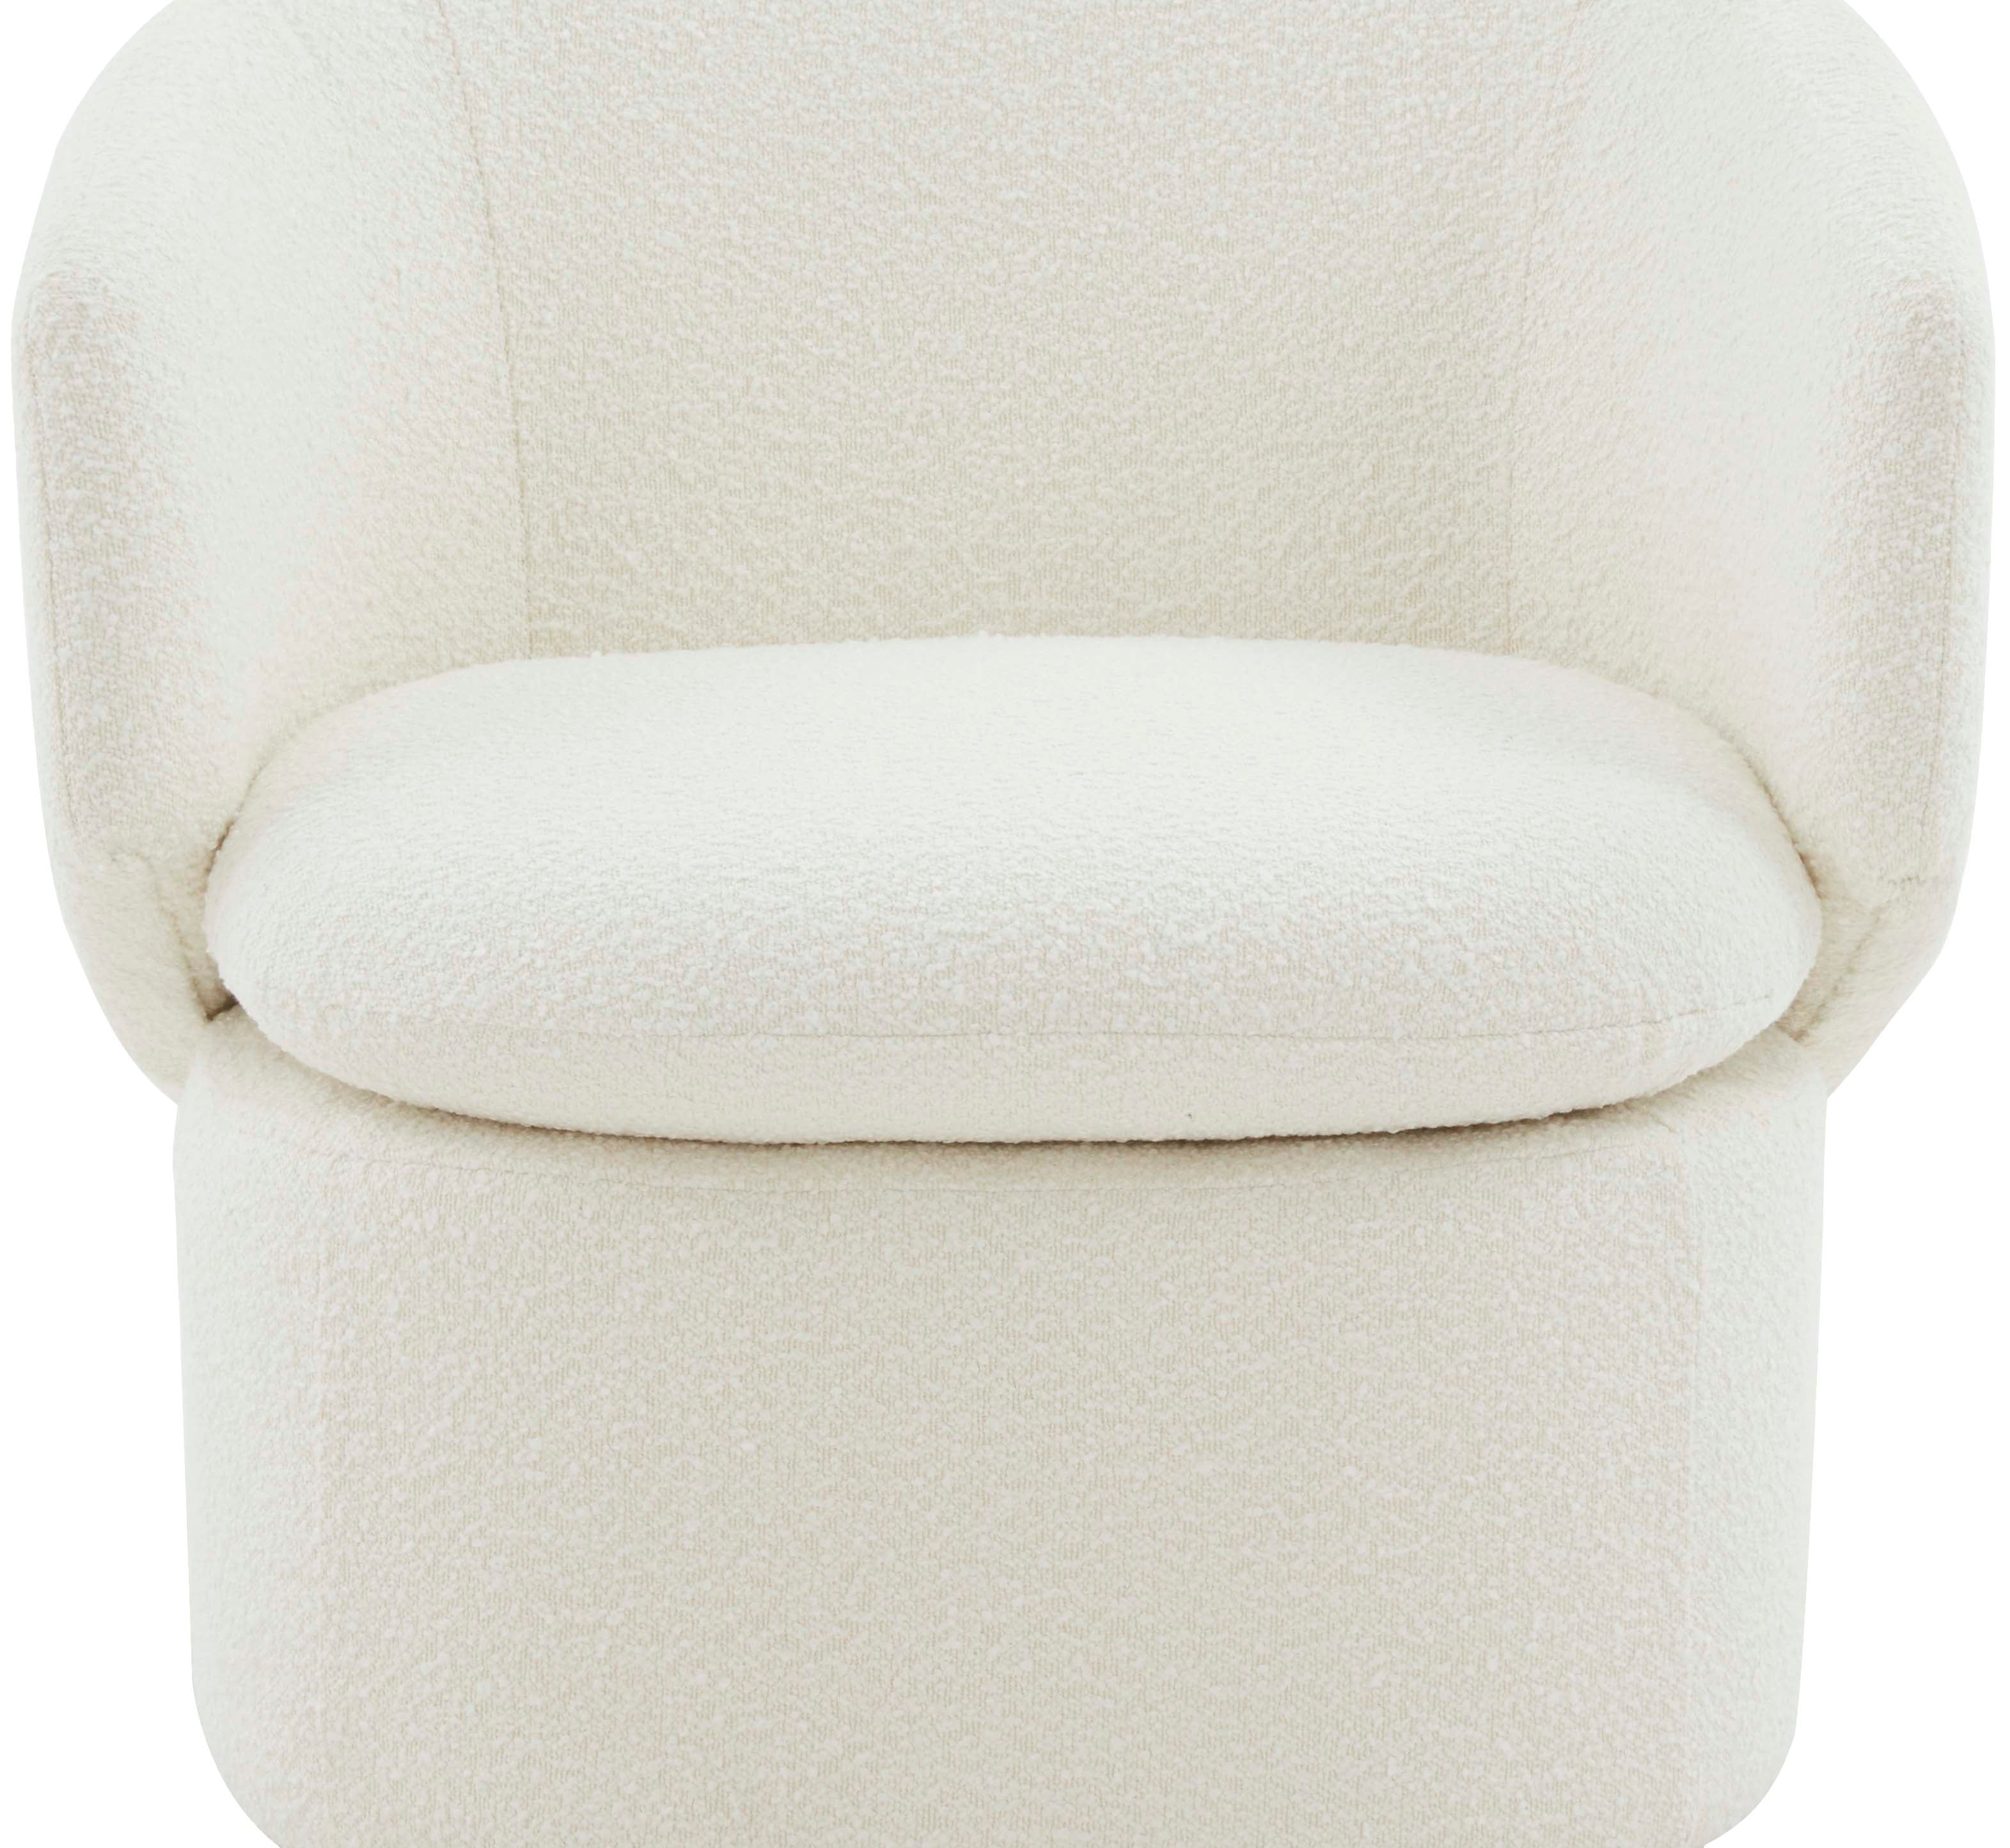 Safavieh Couture Phyllis Boucle Swivel Chair - Ivory